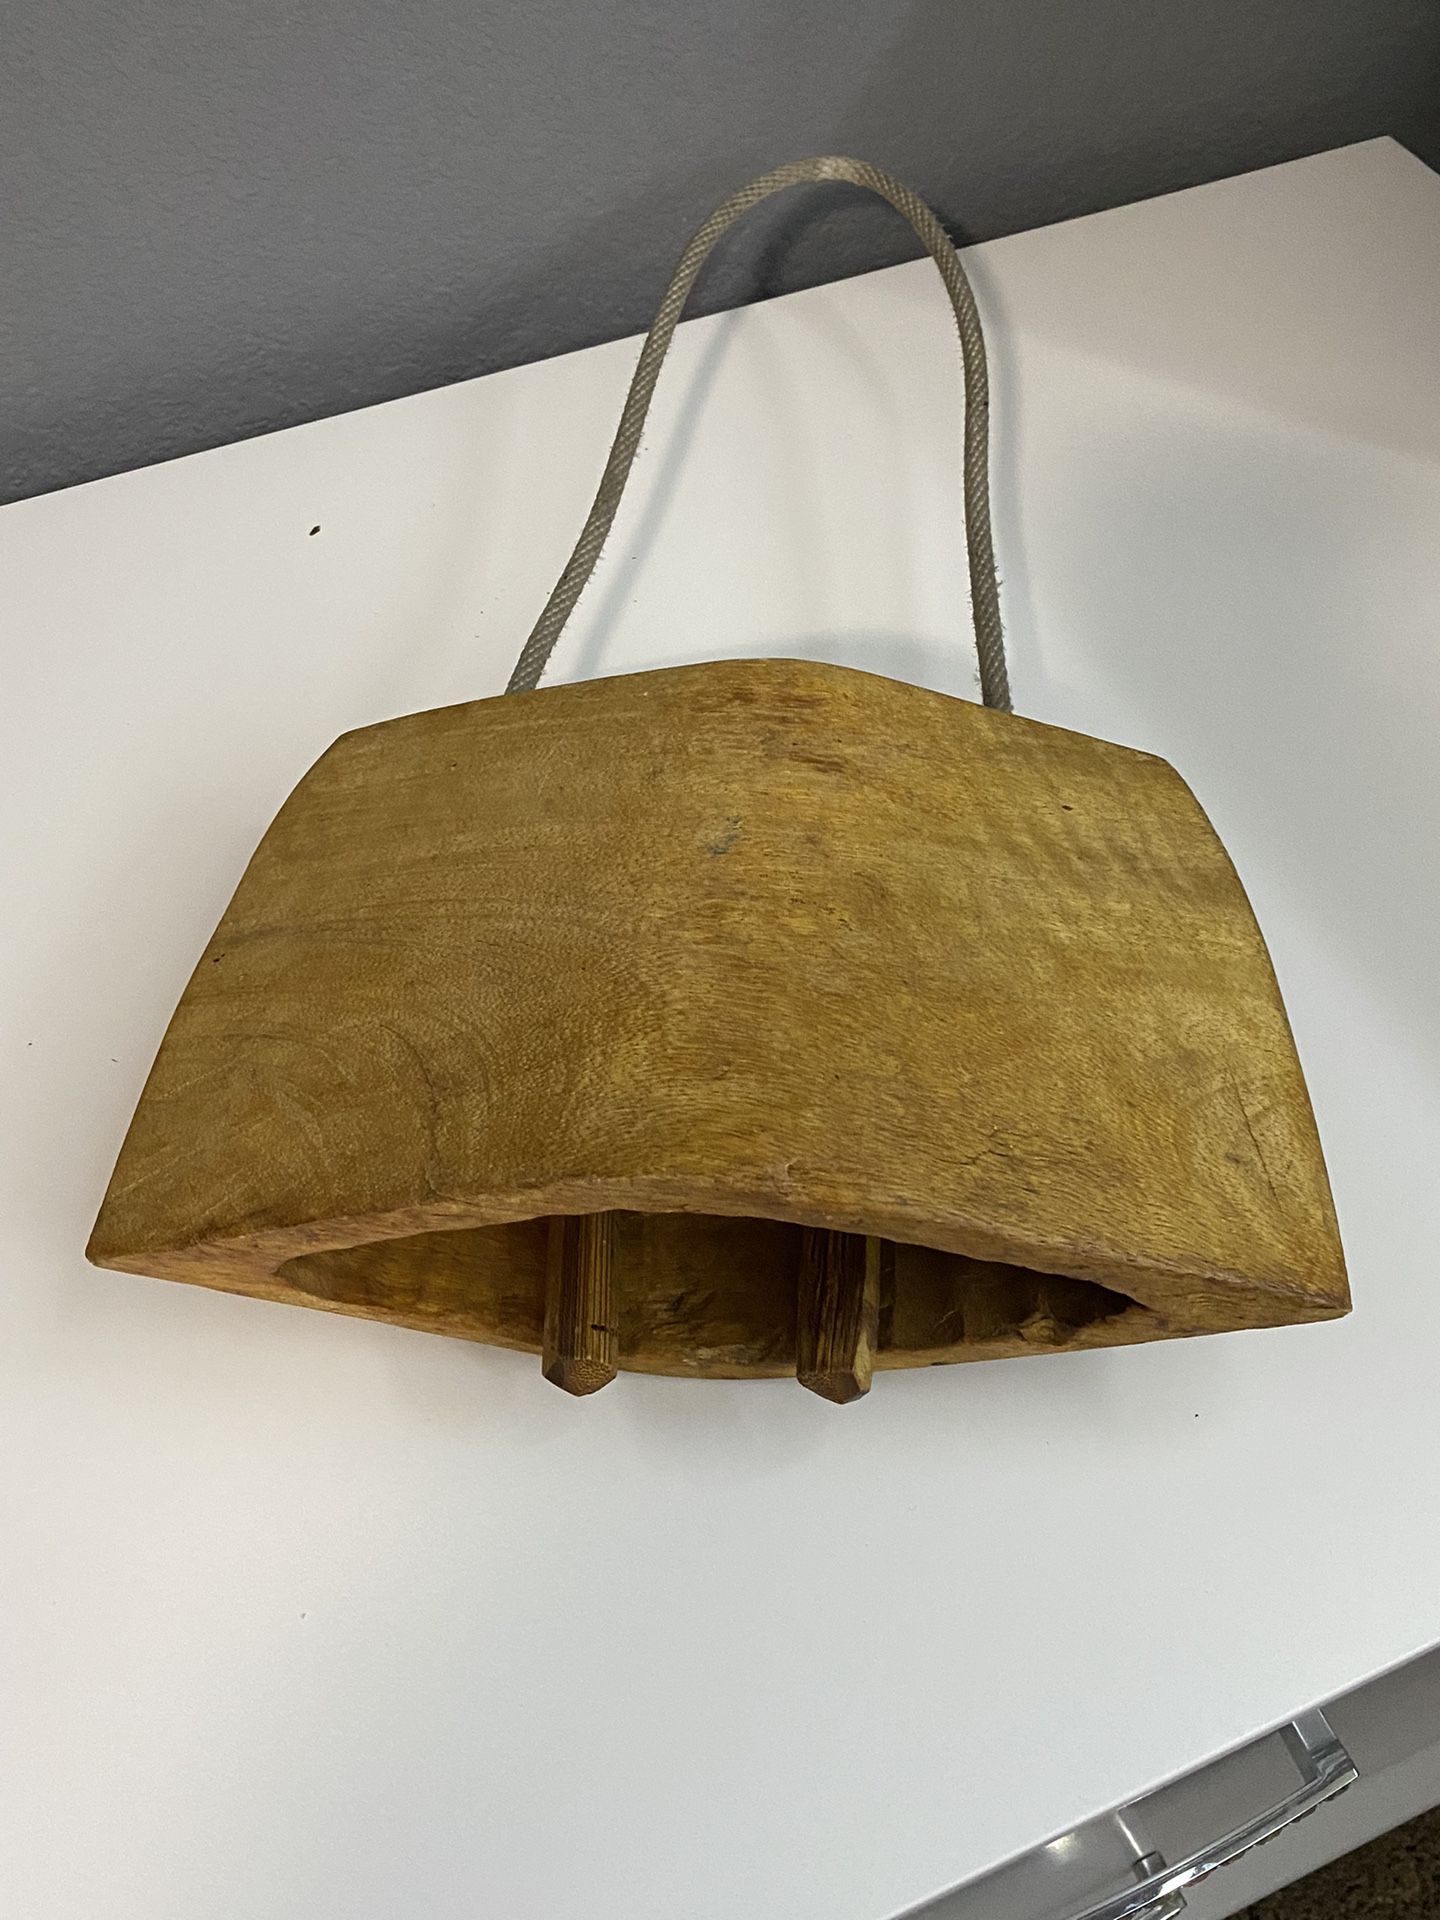 10”L x 6”H Wooden Cowbell (with The Rope 25”H)